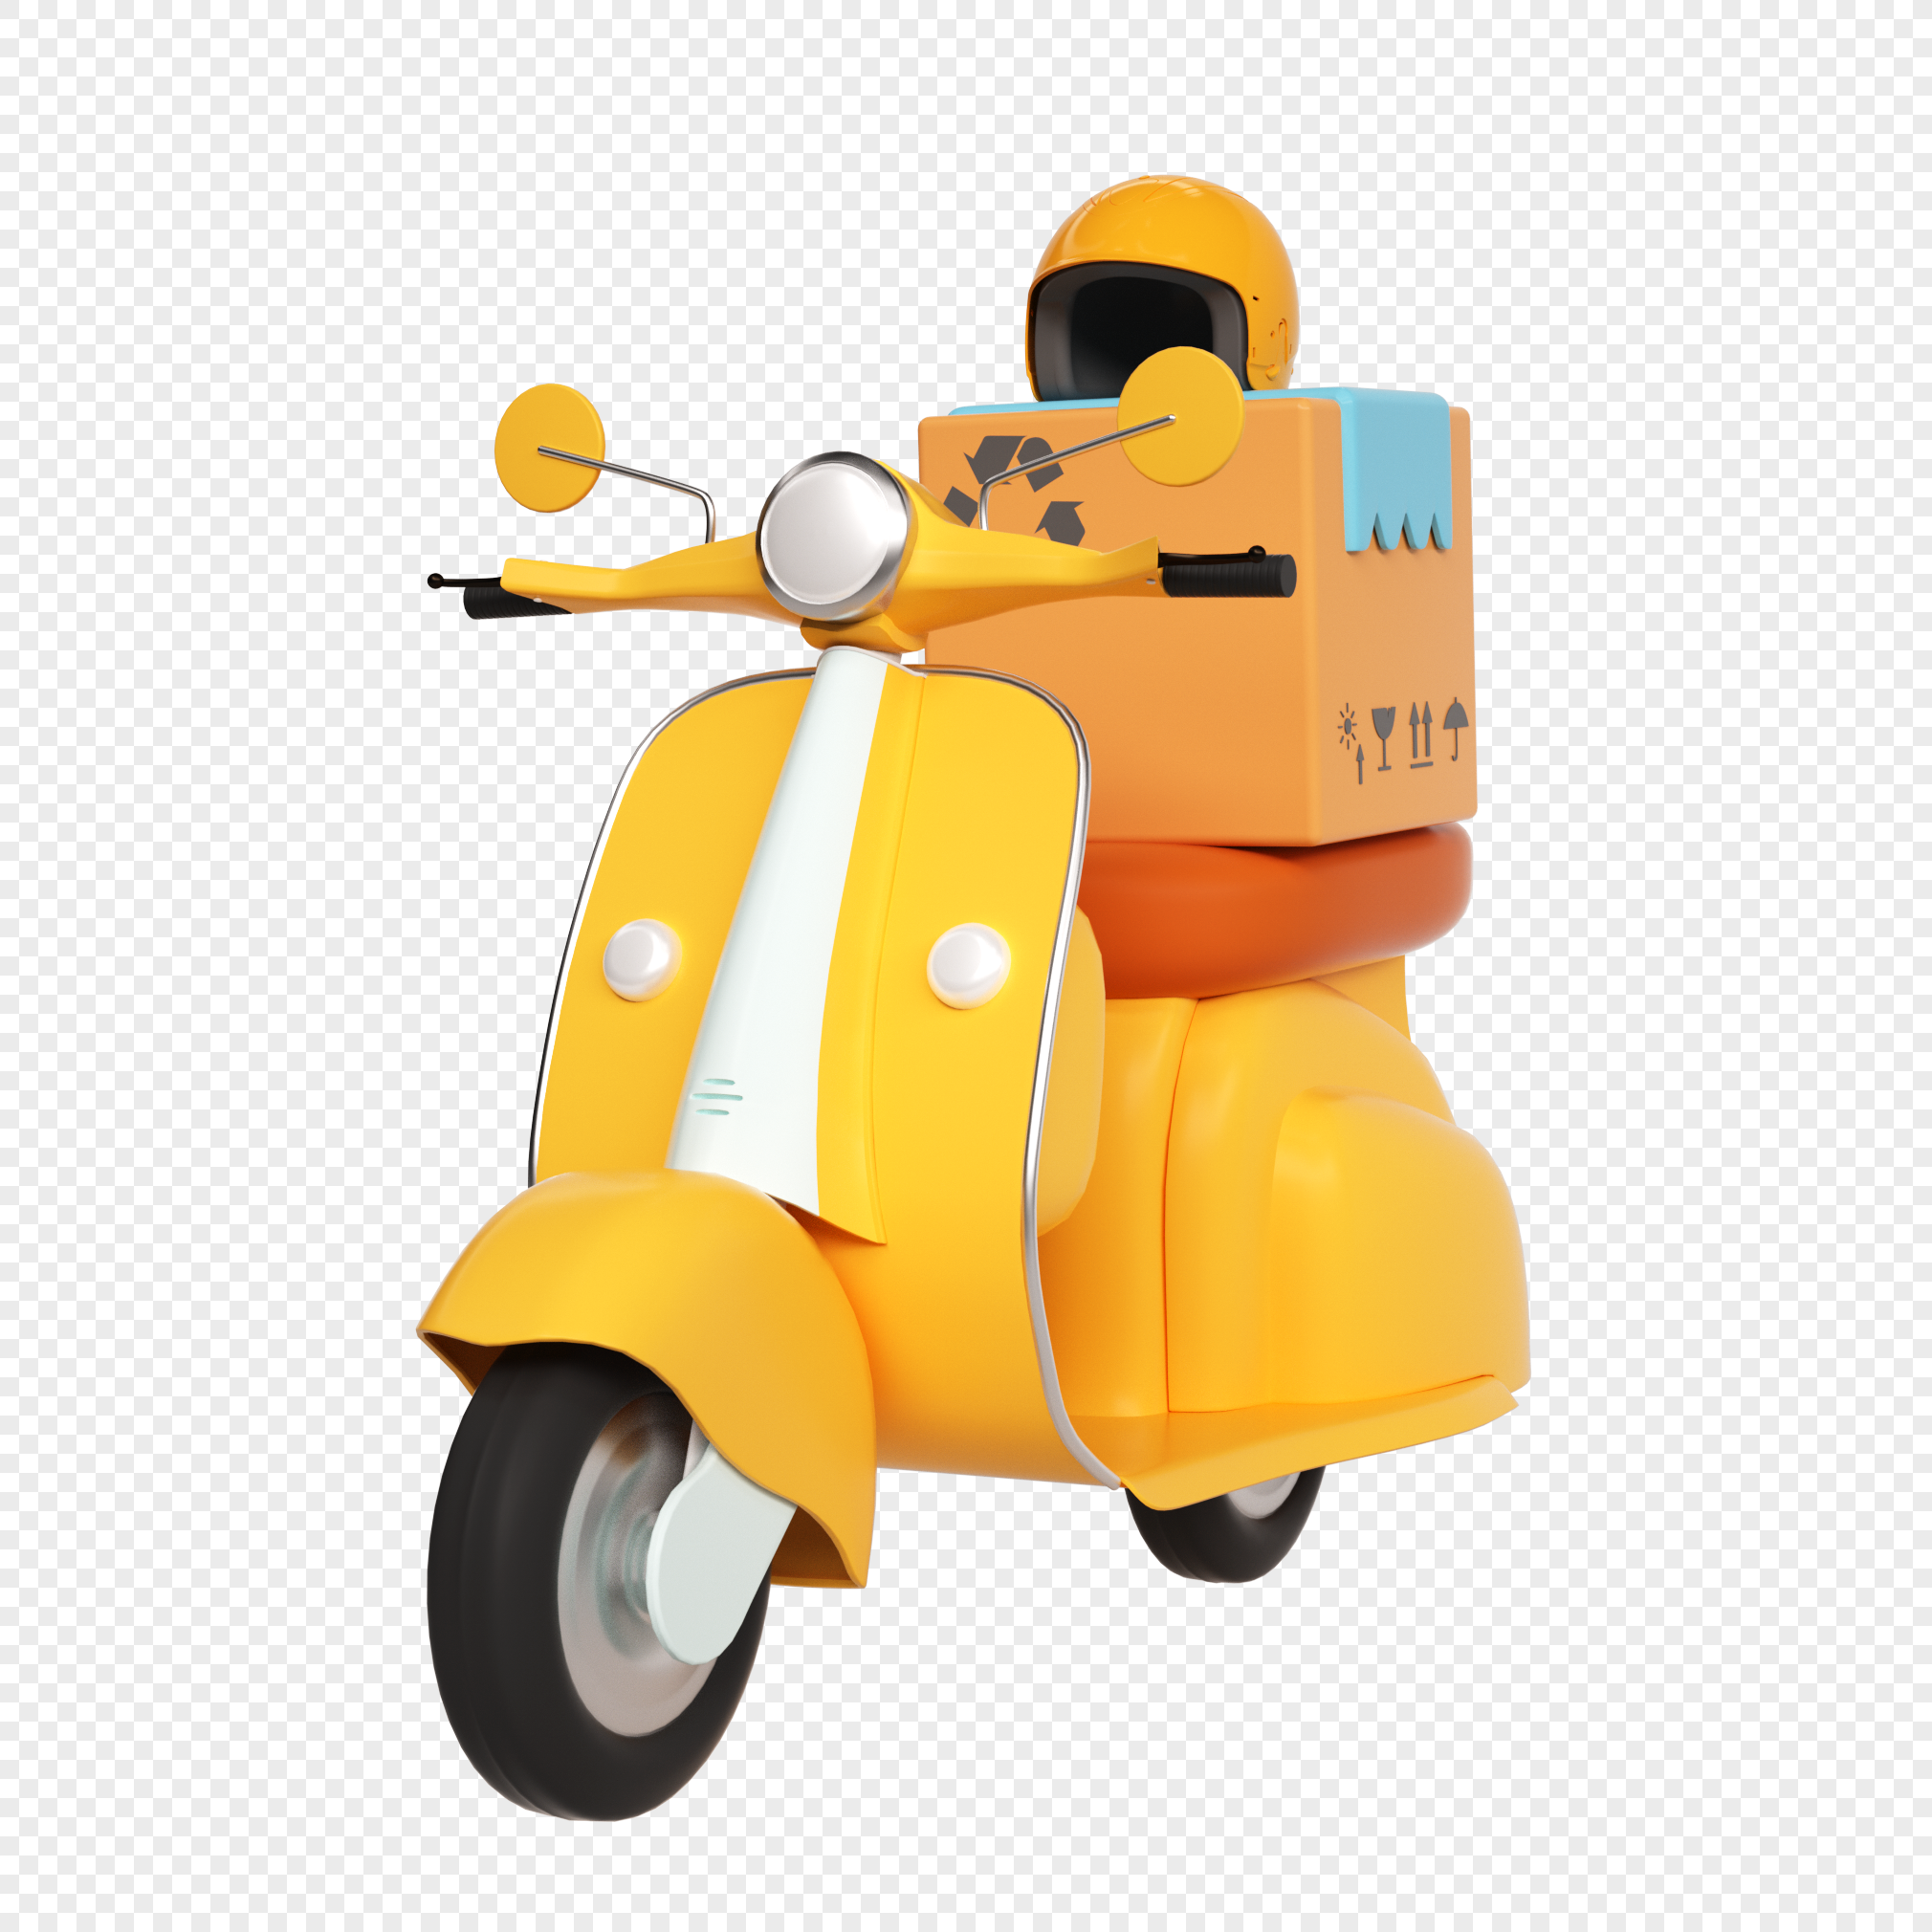 3D three-dimensional motorcycle express delivery e-commerce e-commerce activity theme model elements, delivery motorcycle, theme, three dimensional png image